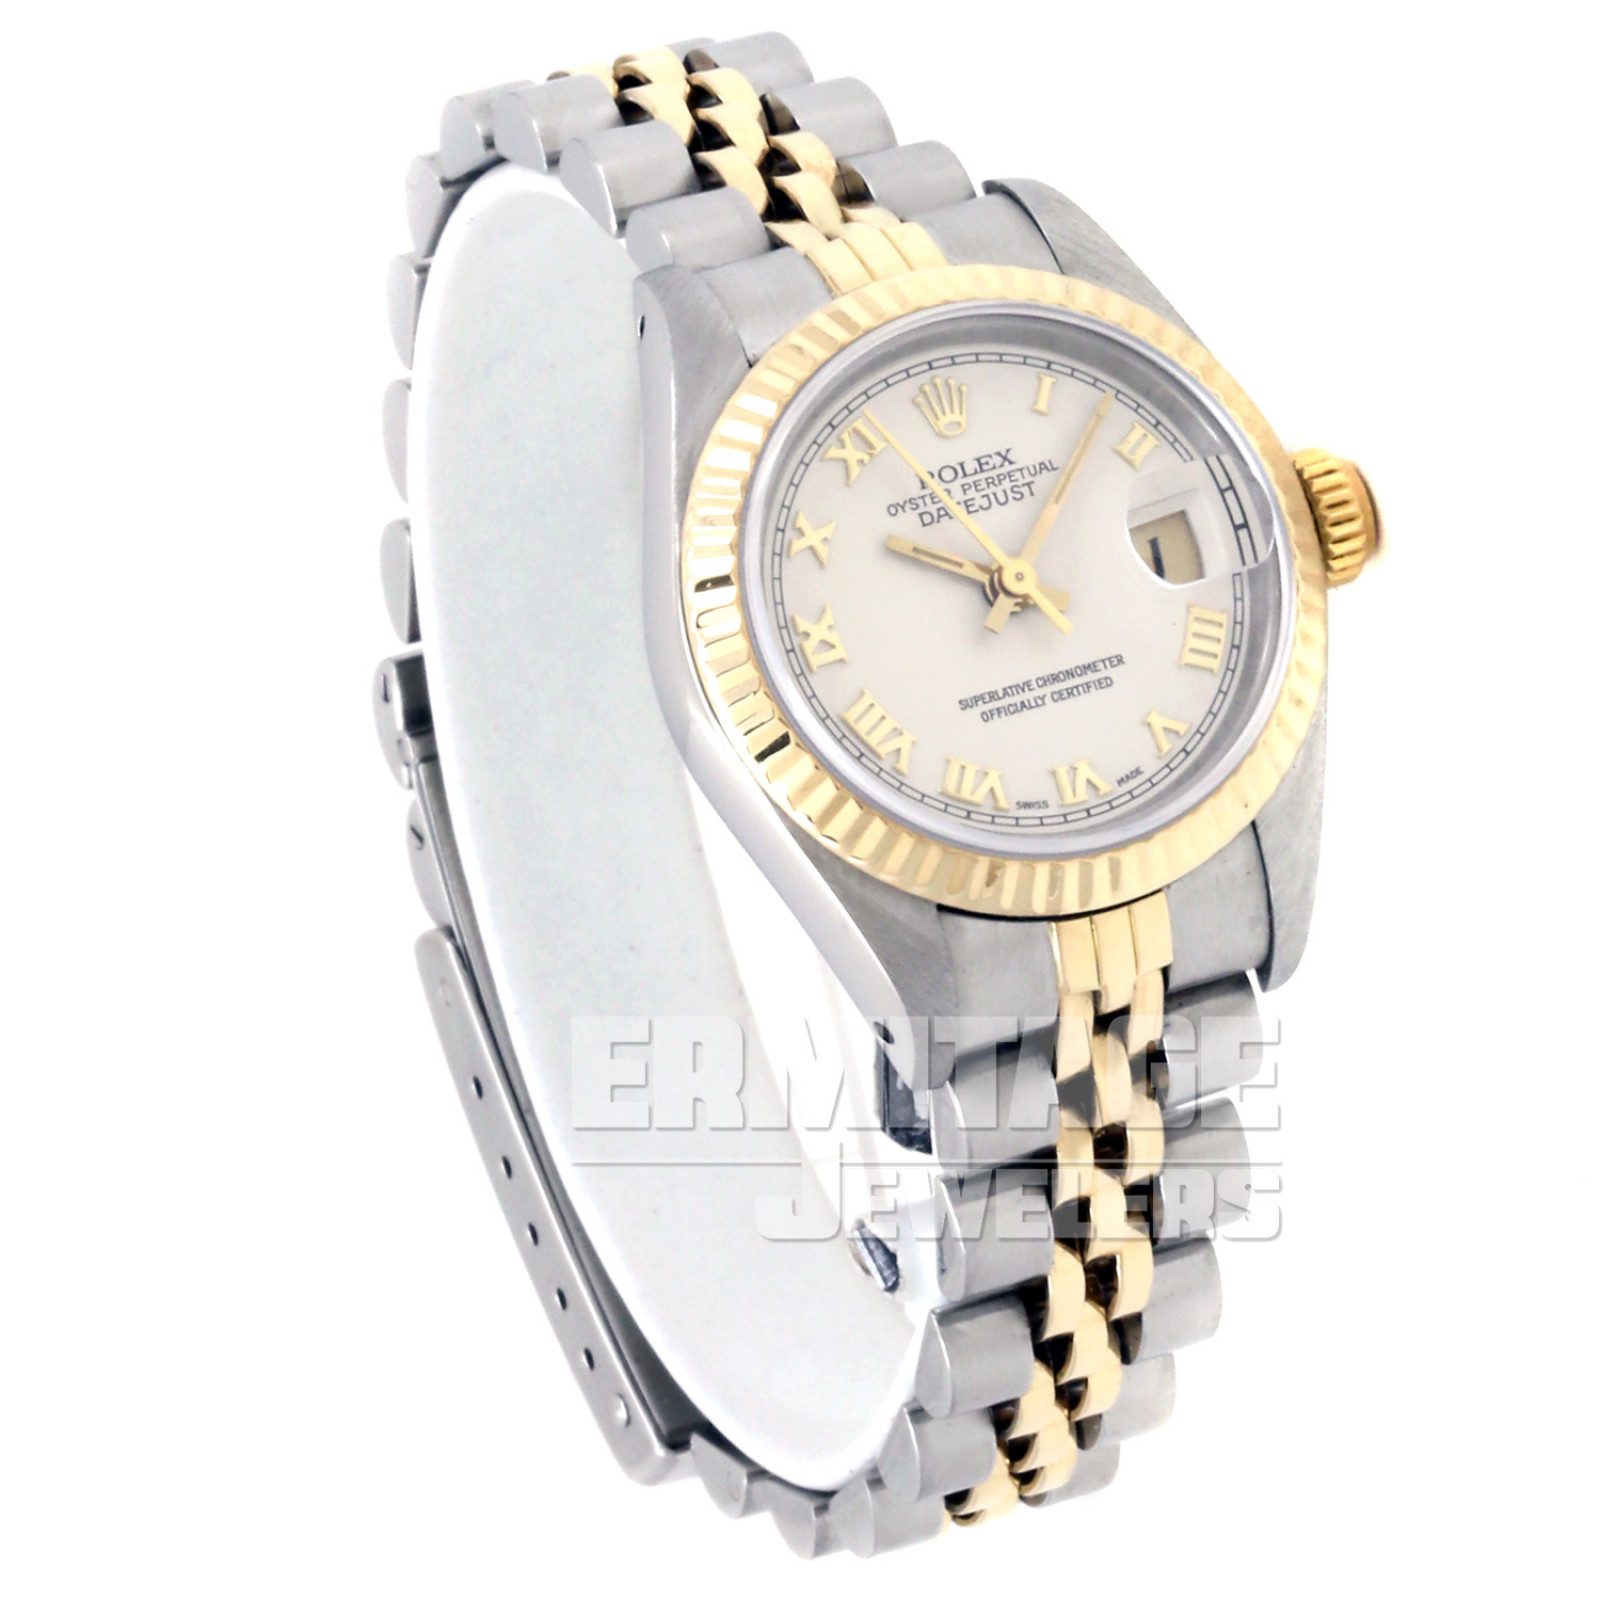 Rolex Datejust 69173 with Ivory Dial